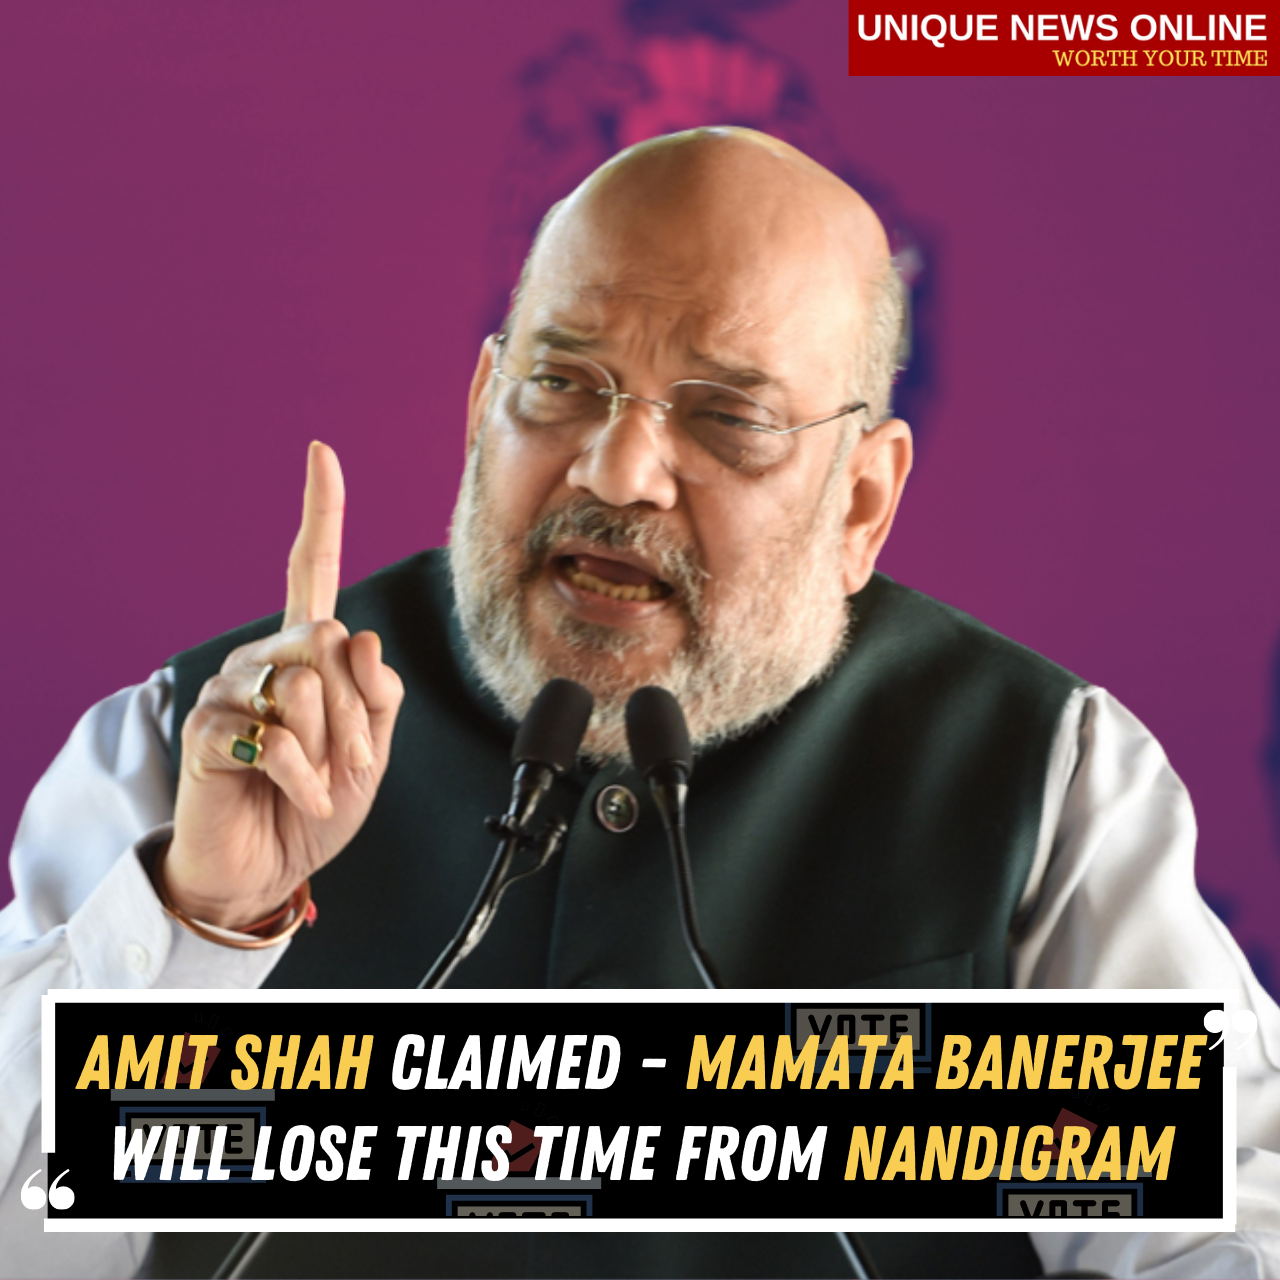 Amit Shah Claimed - Mamata Banerjee will lose this time in Nandigram